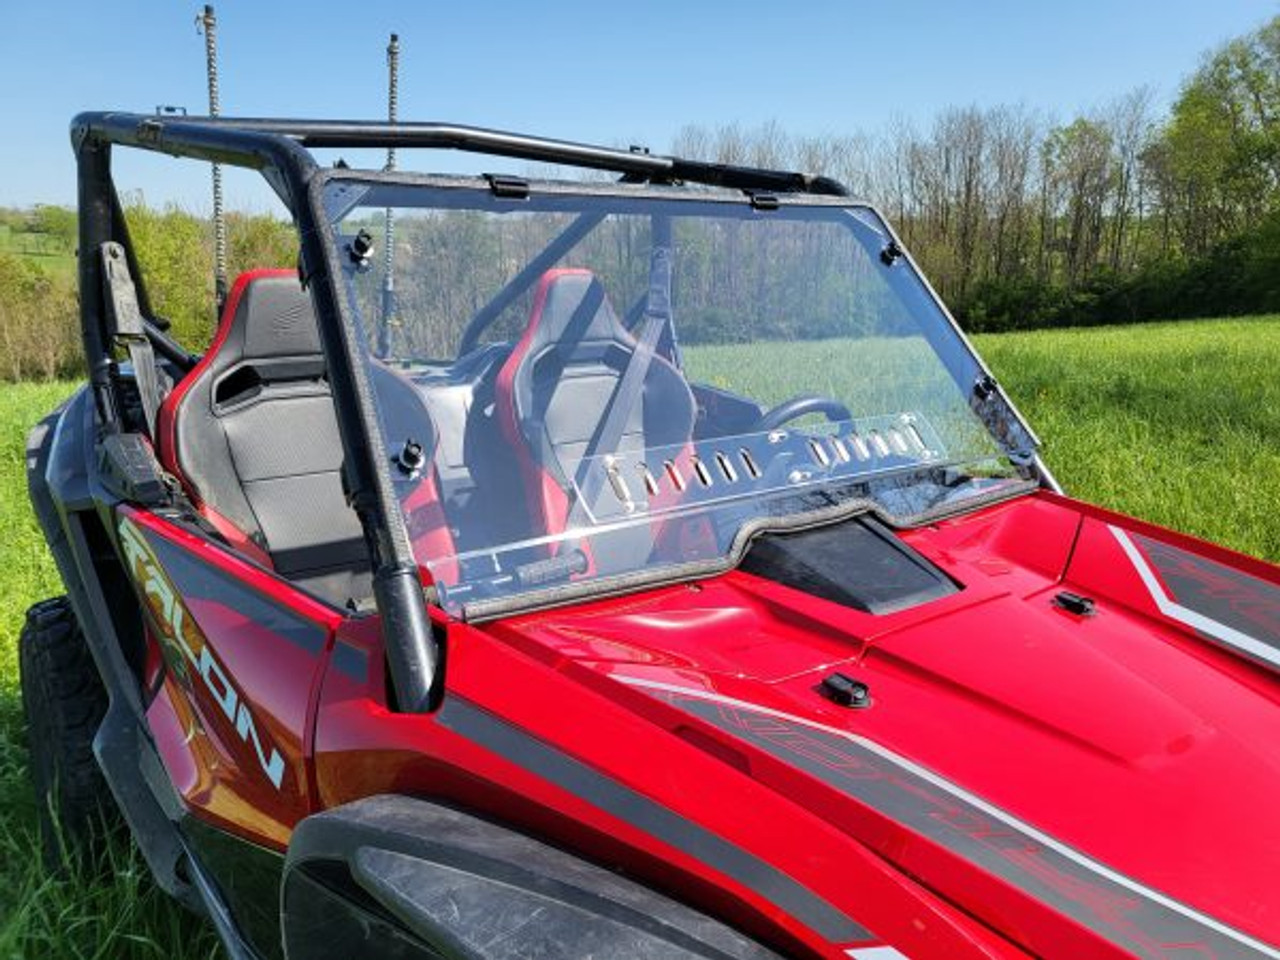 3 Star side x side Honda Talon 1000-2 windshield front and side angle view